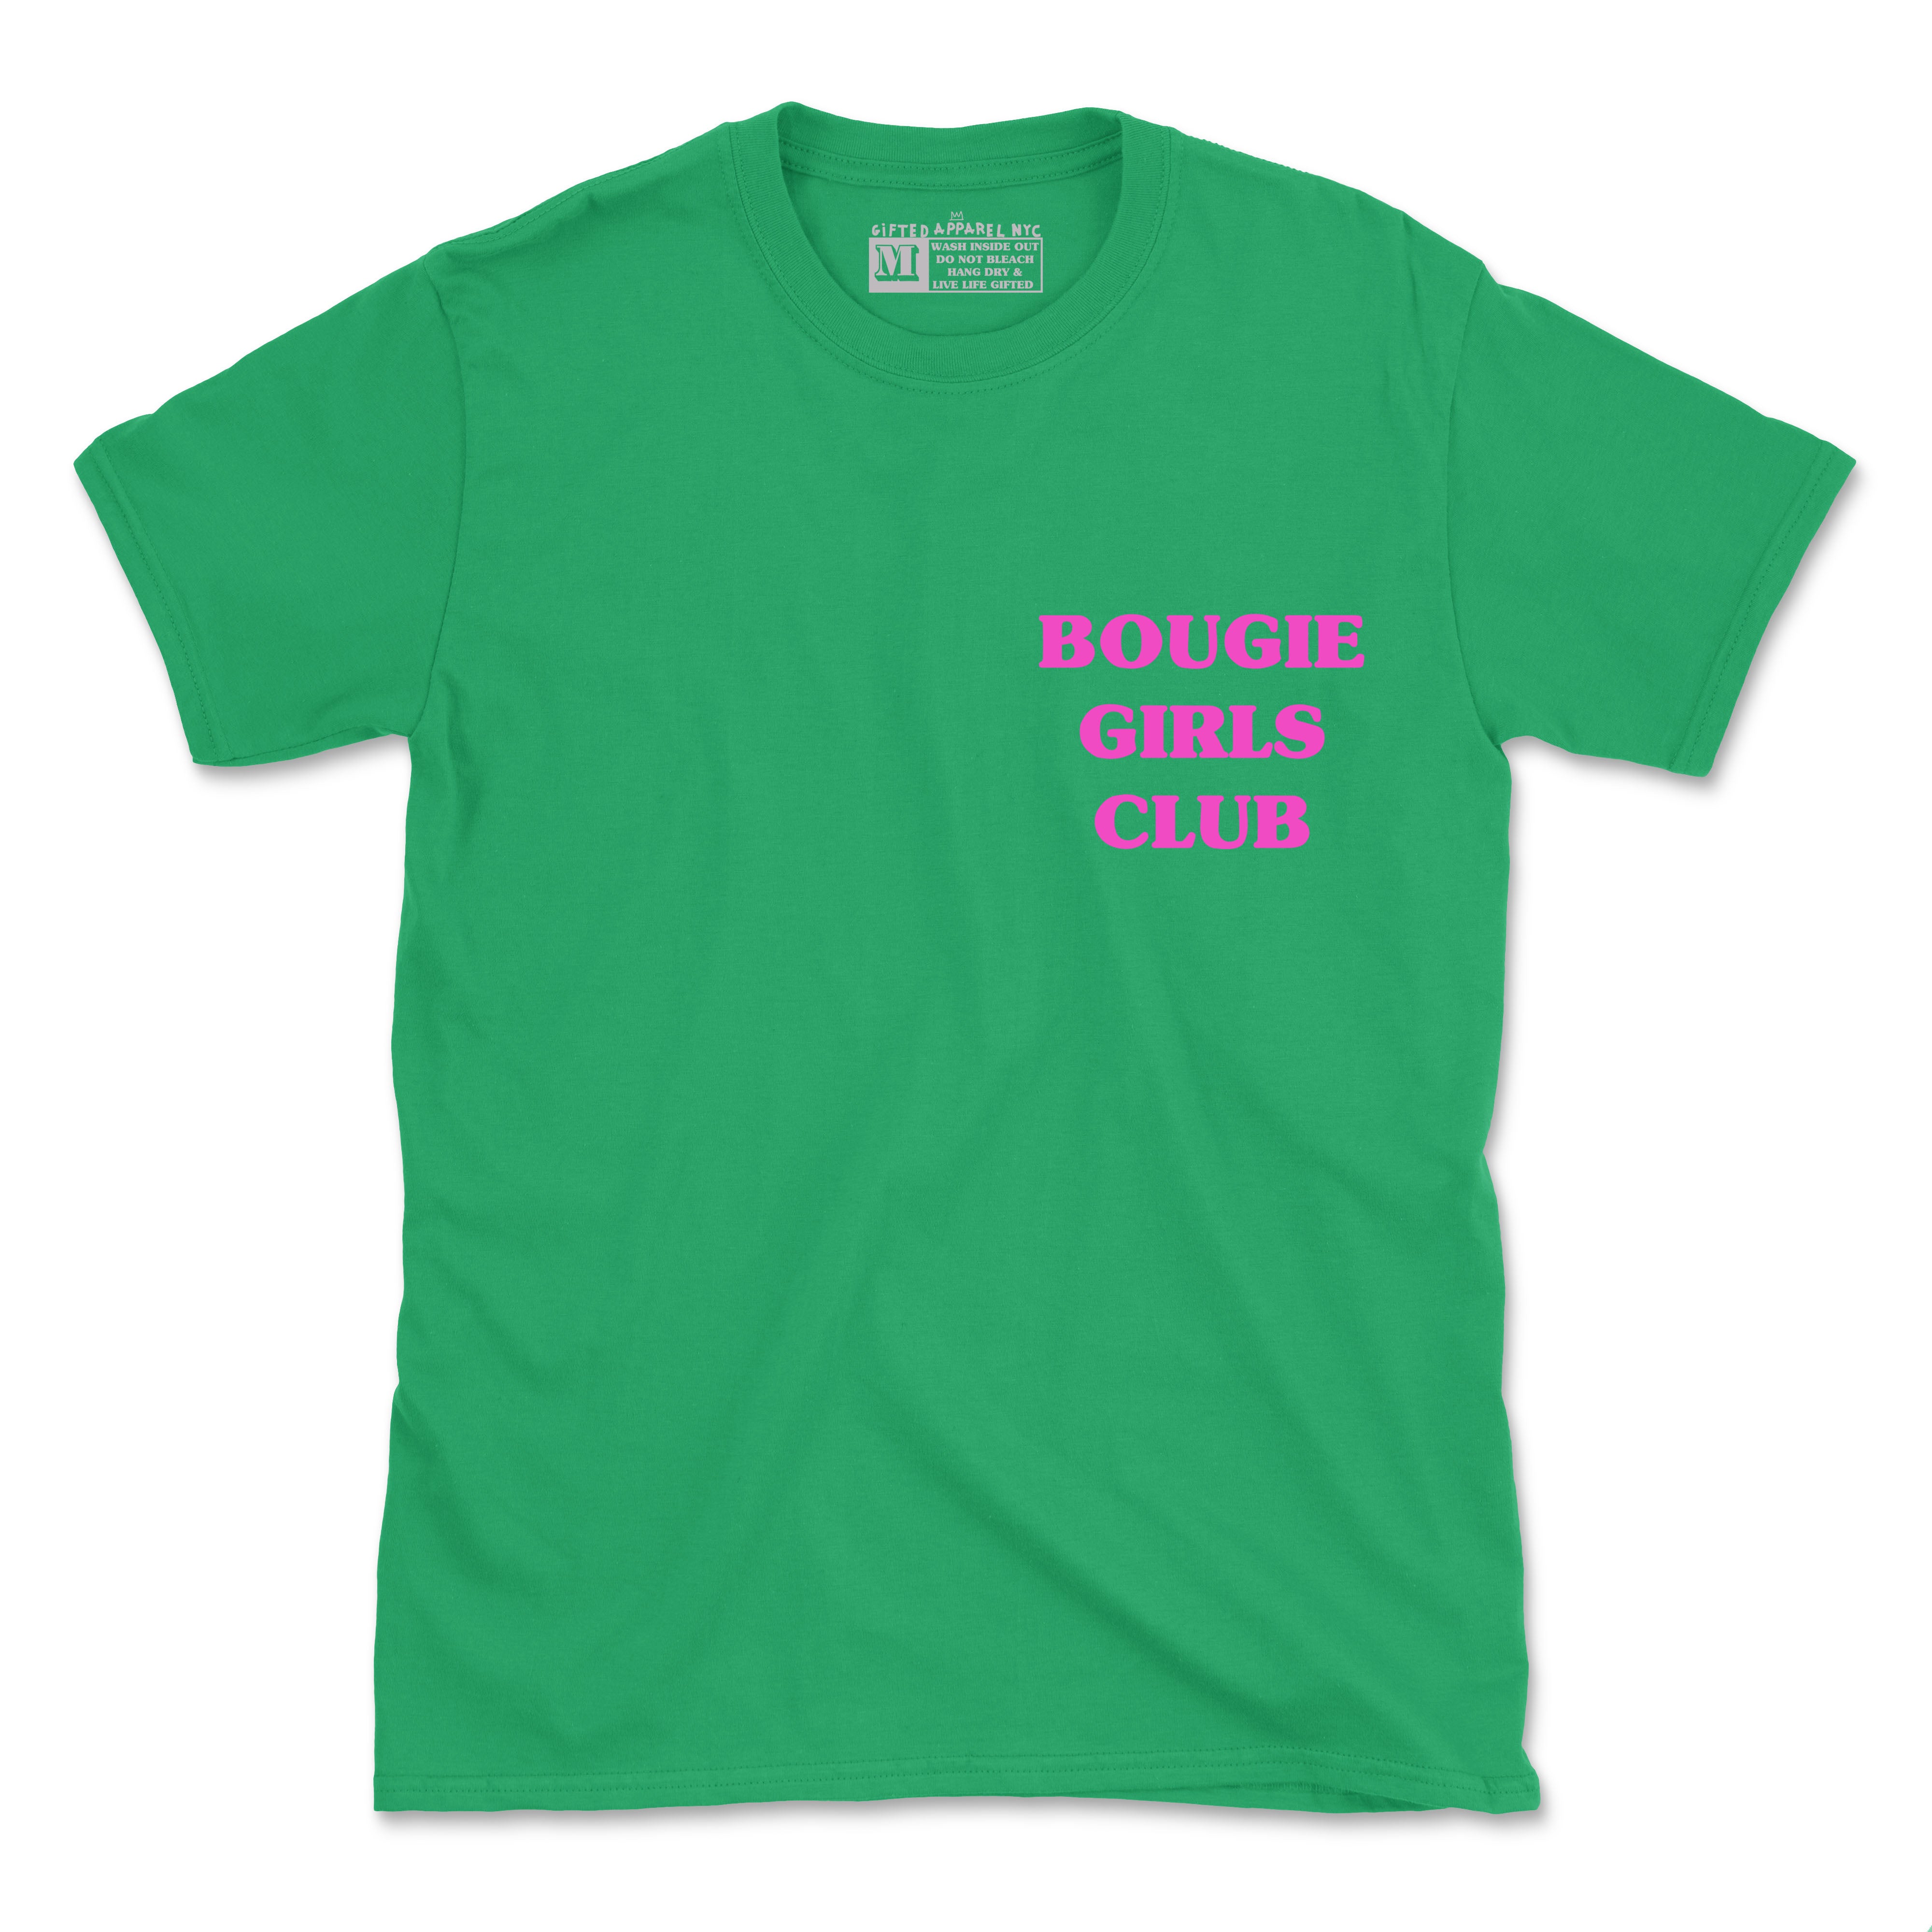 BOUGIE GIRLS CLUB TEE (UNISEX FIT) PUFF DESIGN 2 For $35 (NO CODE NEED ...